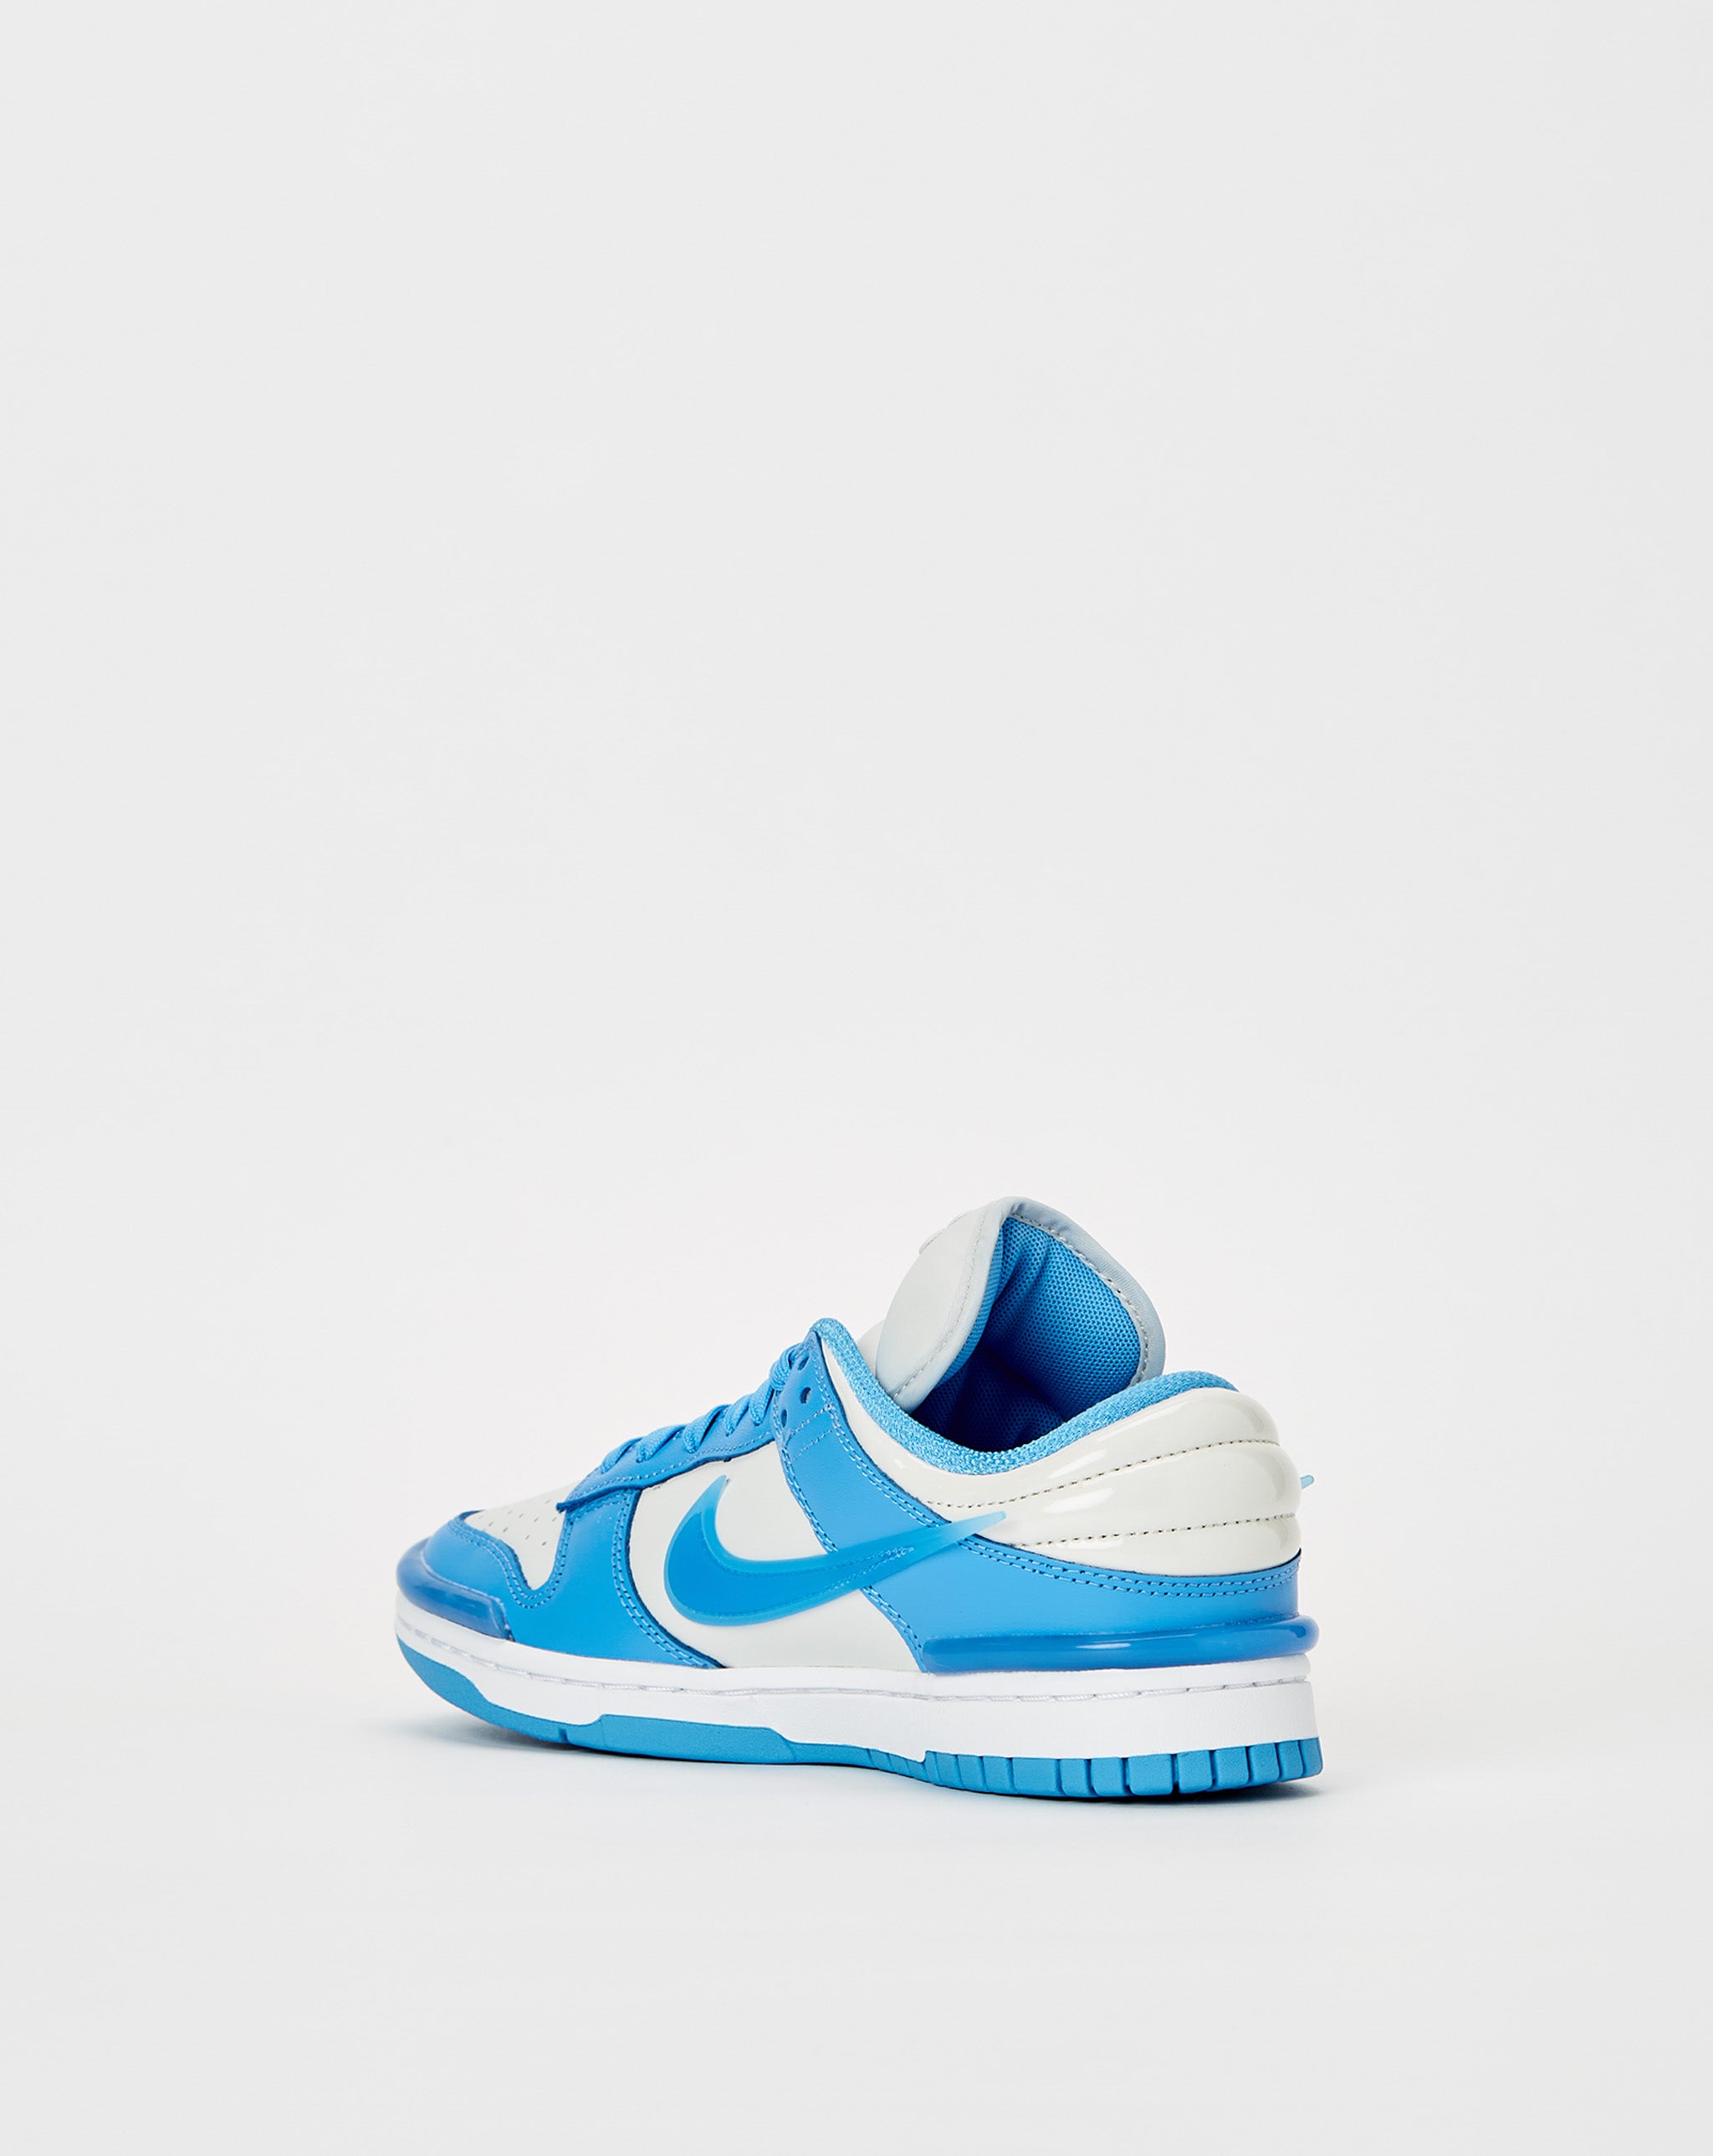 Nike nike bruin shoe red and white gold blue background  - Cheap Erlebniswelt-fliegenfischen Jordan outlet